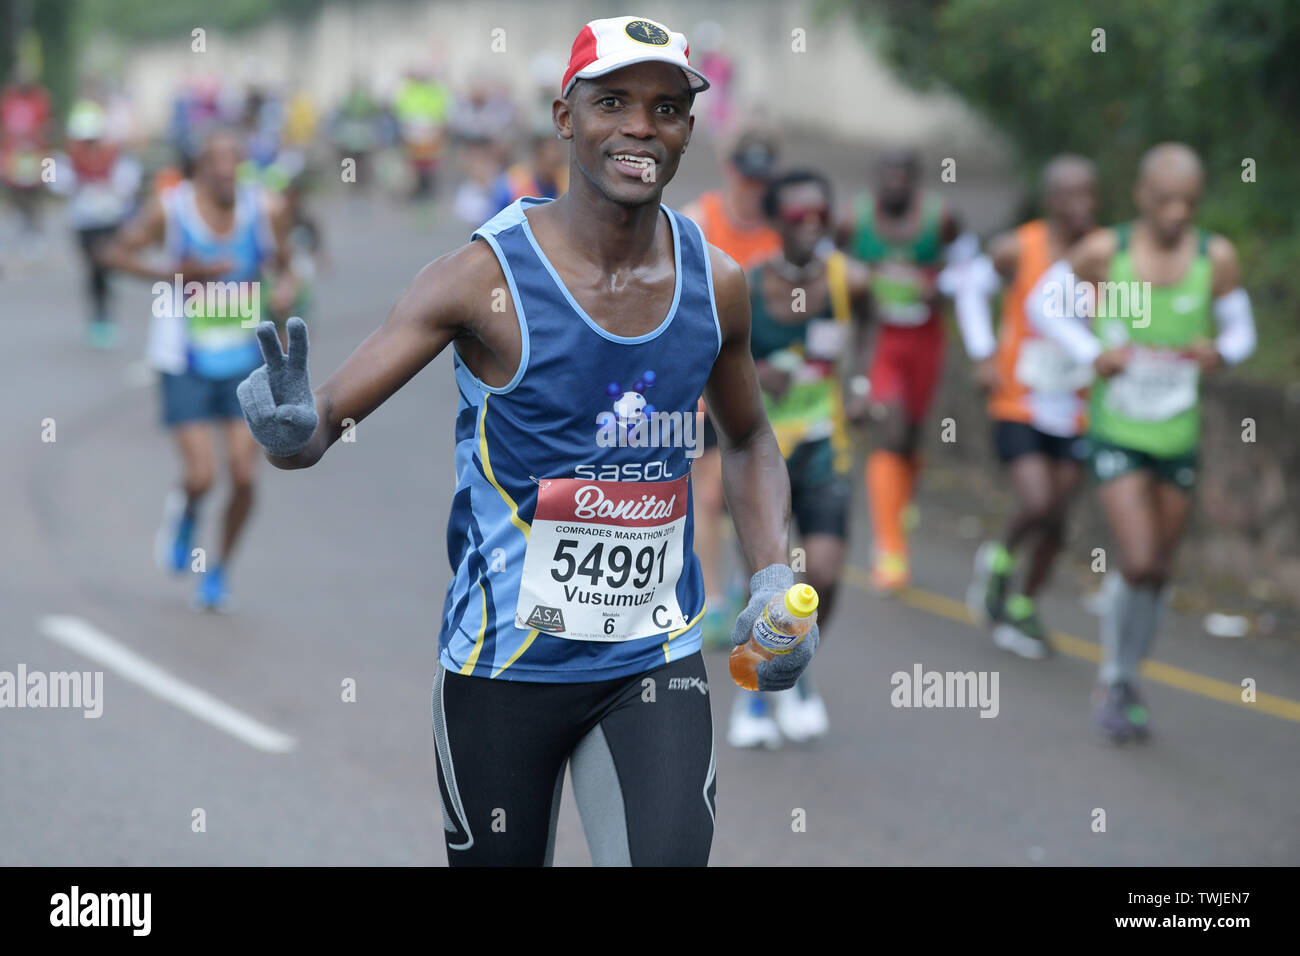 Durban, South Africa, adult man gives victory sign while running, 2019, Comrades Marathon, people, runner, athlete, people, sport, fitness Stock Photo